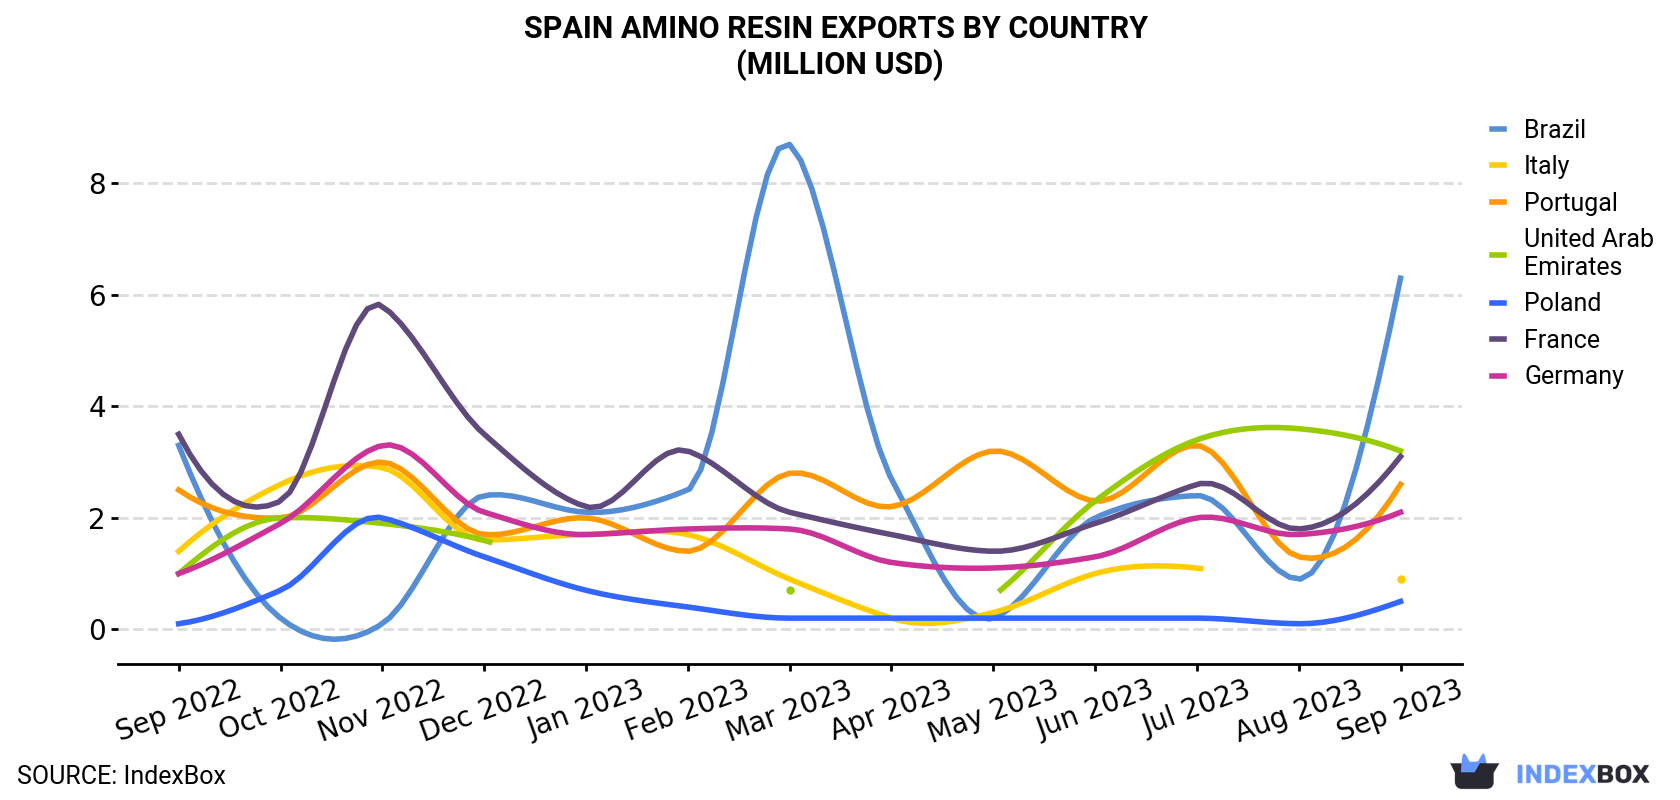 Spain Amino Resin Exports By Country (Million USD)